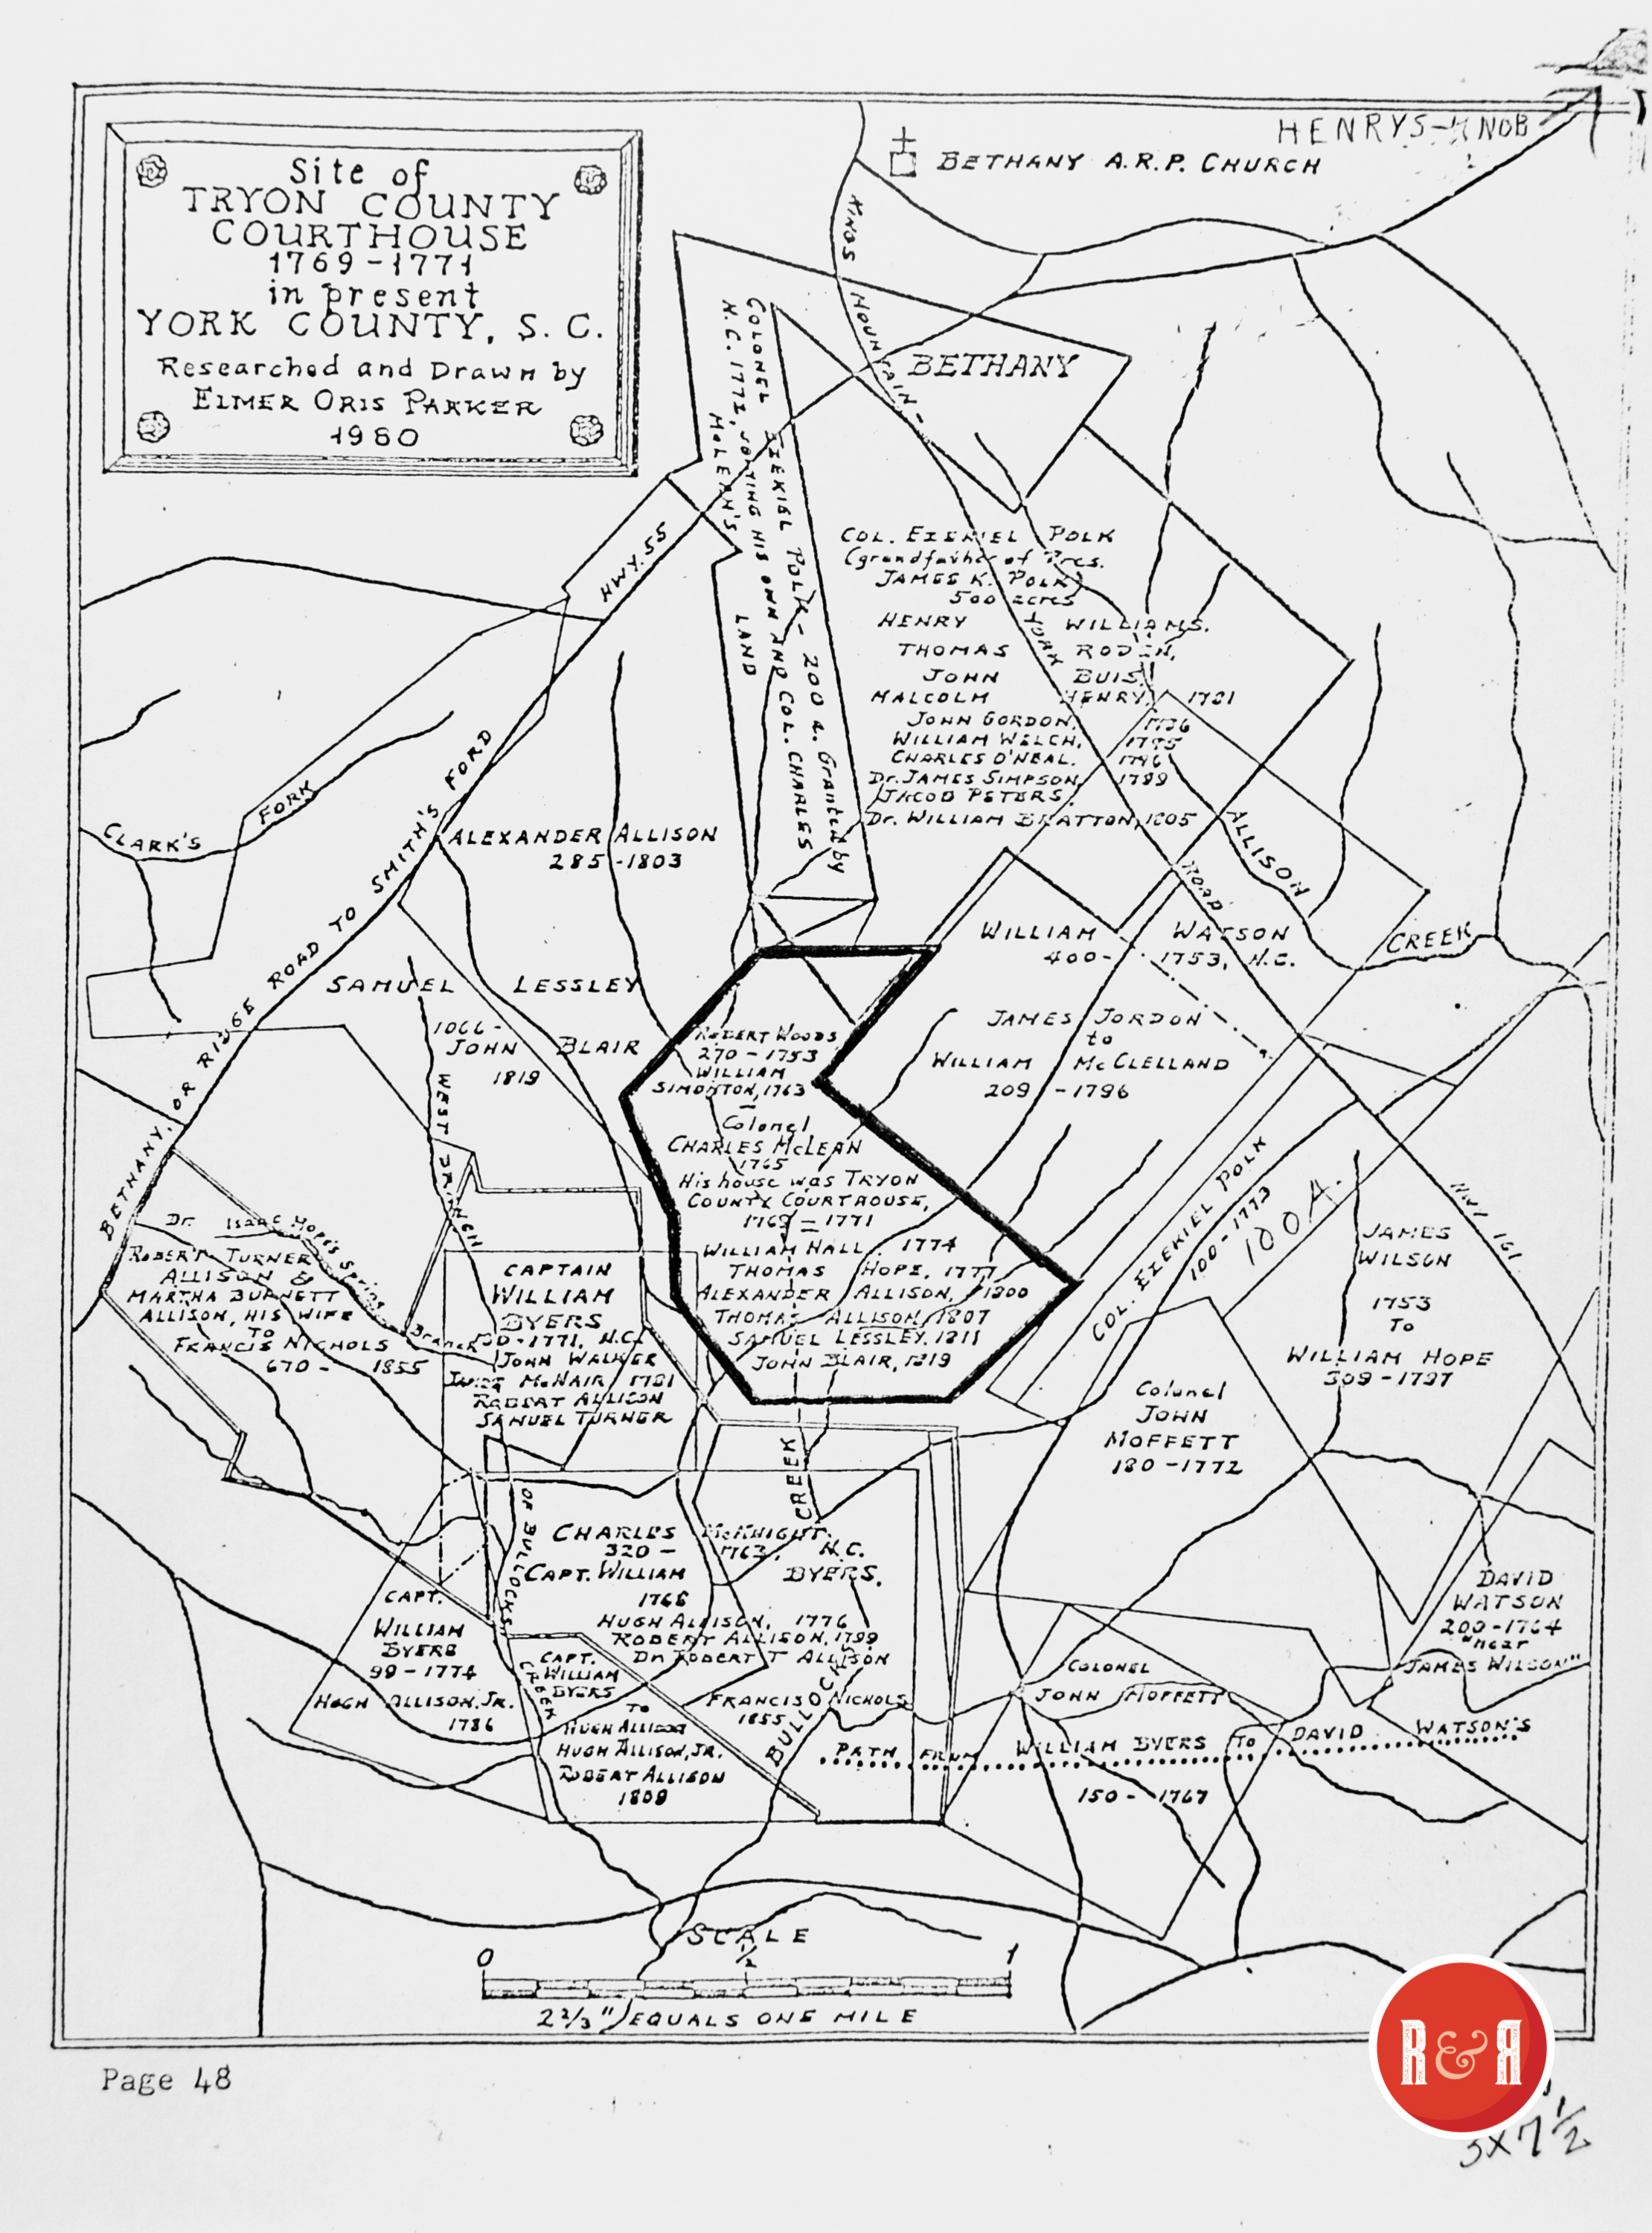 ELMER PARKER'S MAP OF THE TRYON CO COURTHOUSE - ENLARGEMENT